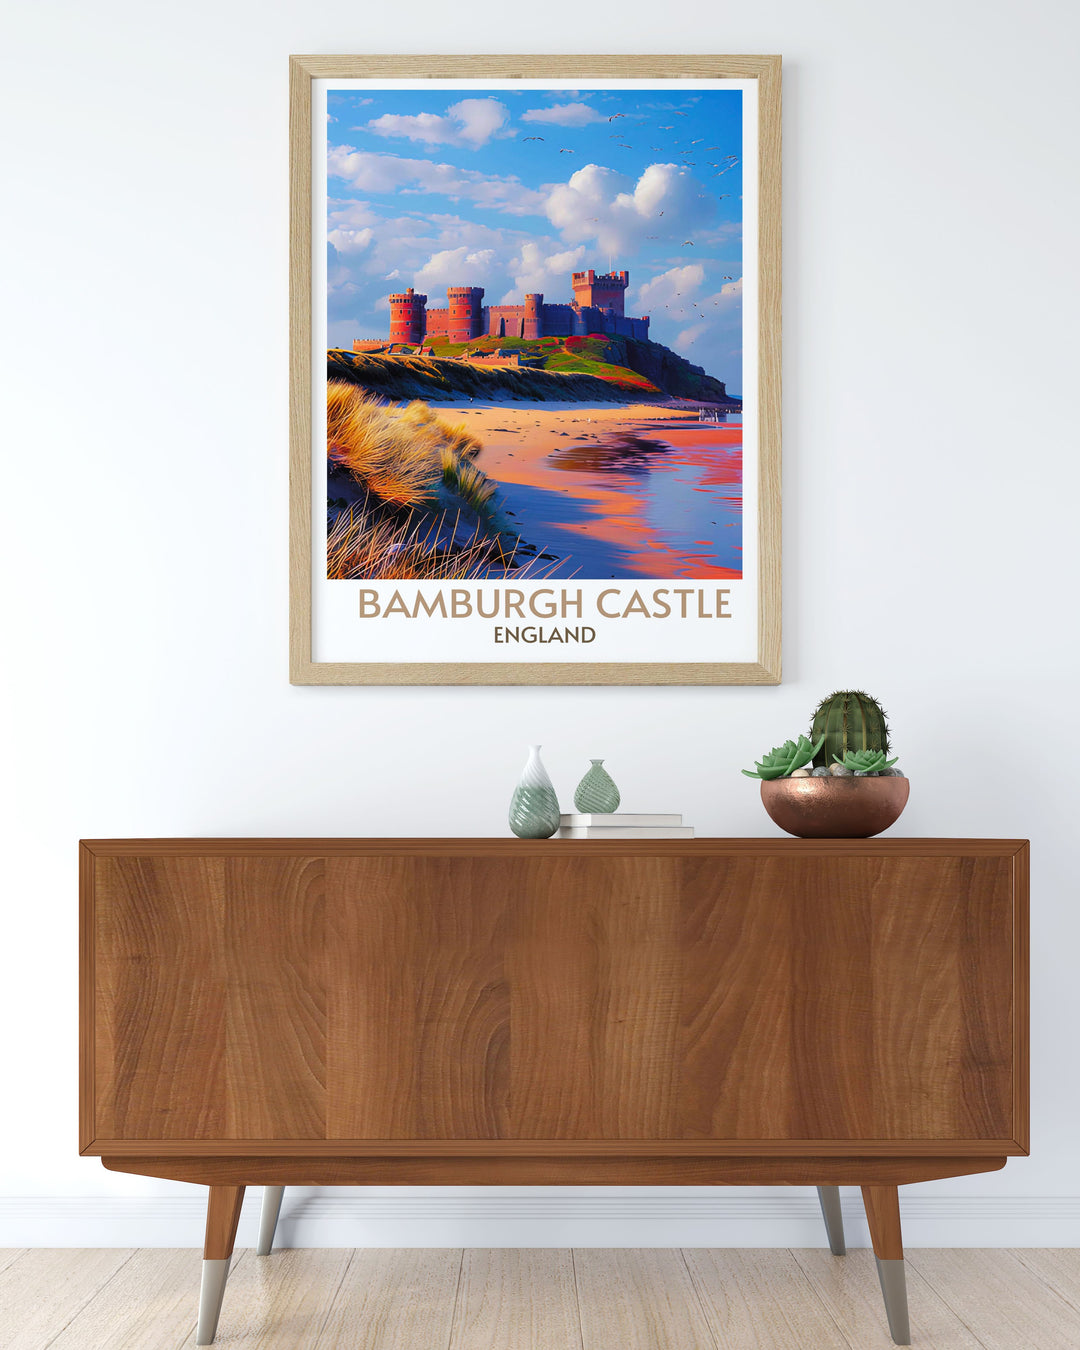 Retro travel poster of Bamburgh Castle with a view of the sandy shores and rugged coastline, printed on high quality archival paper.